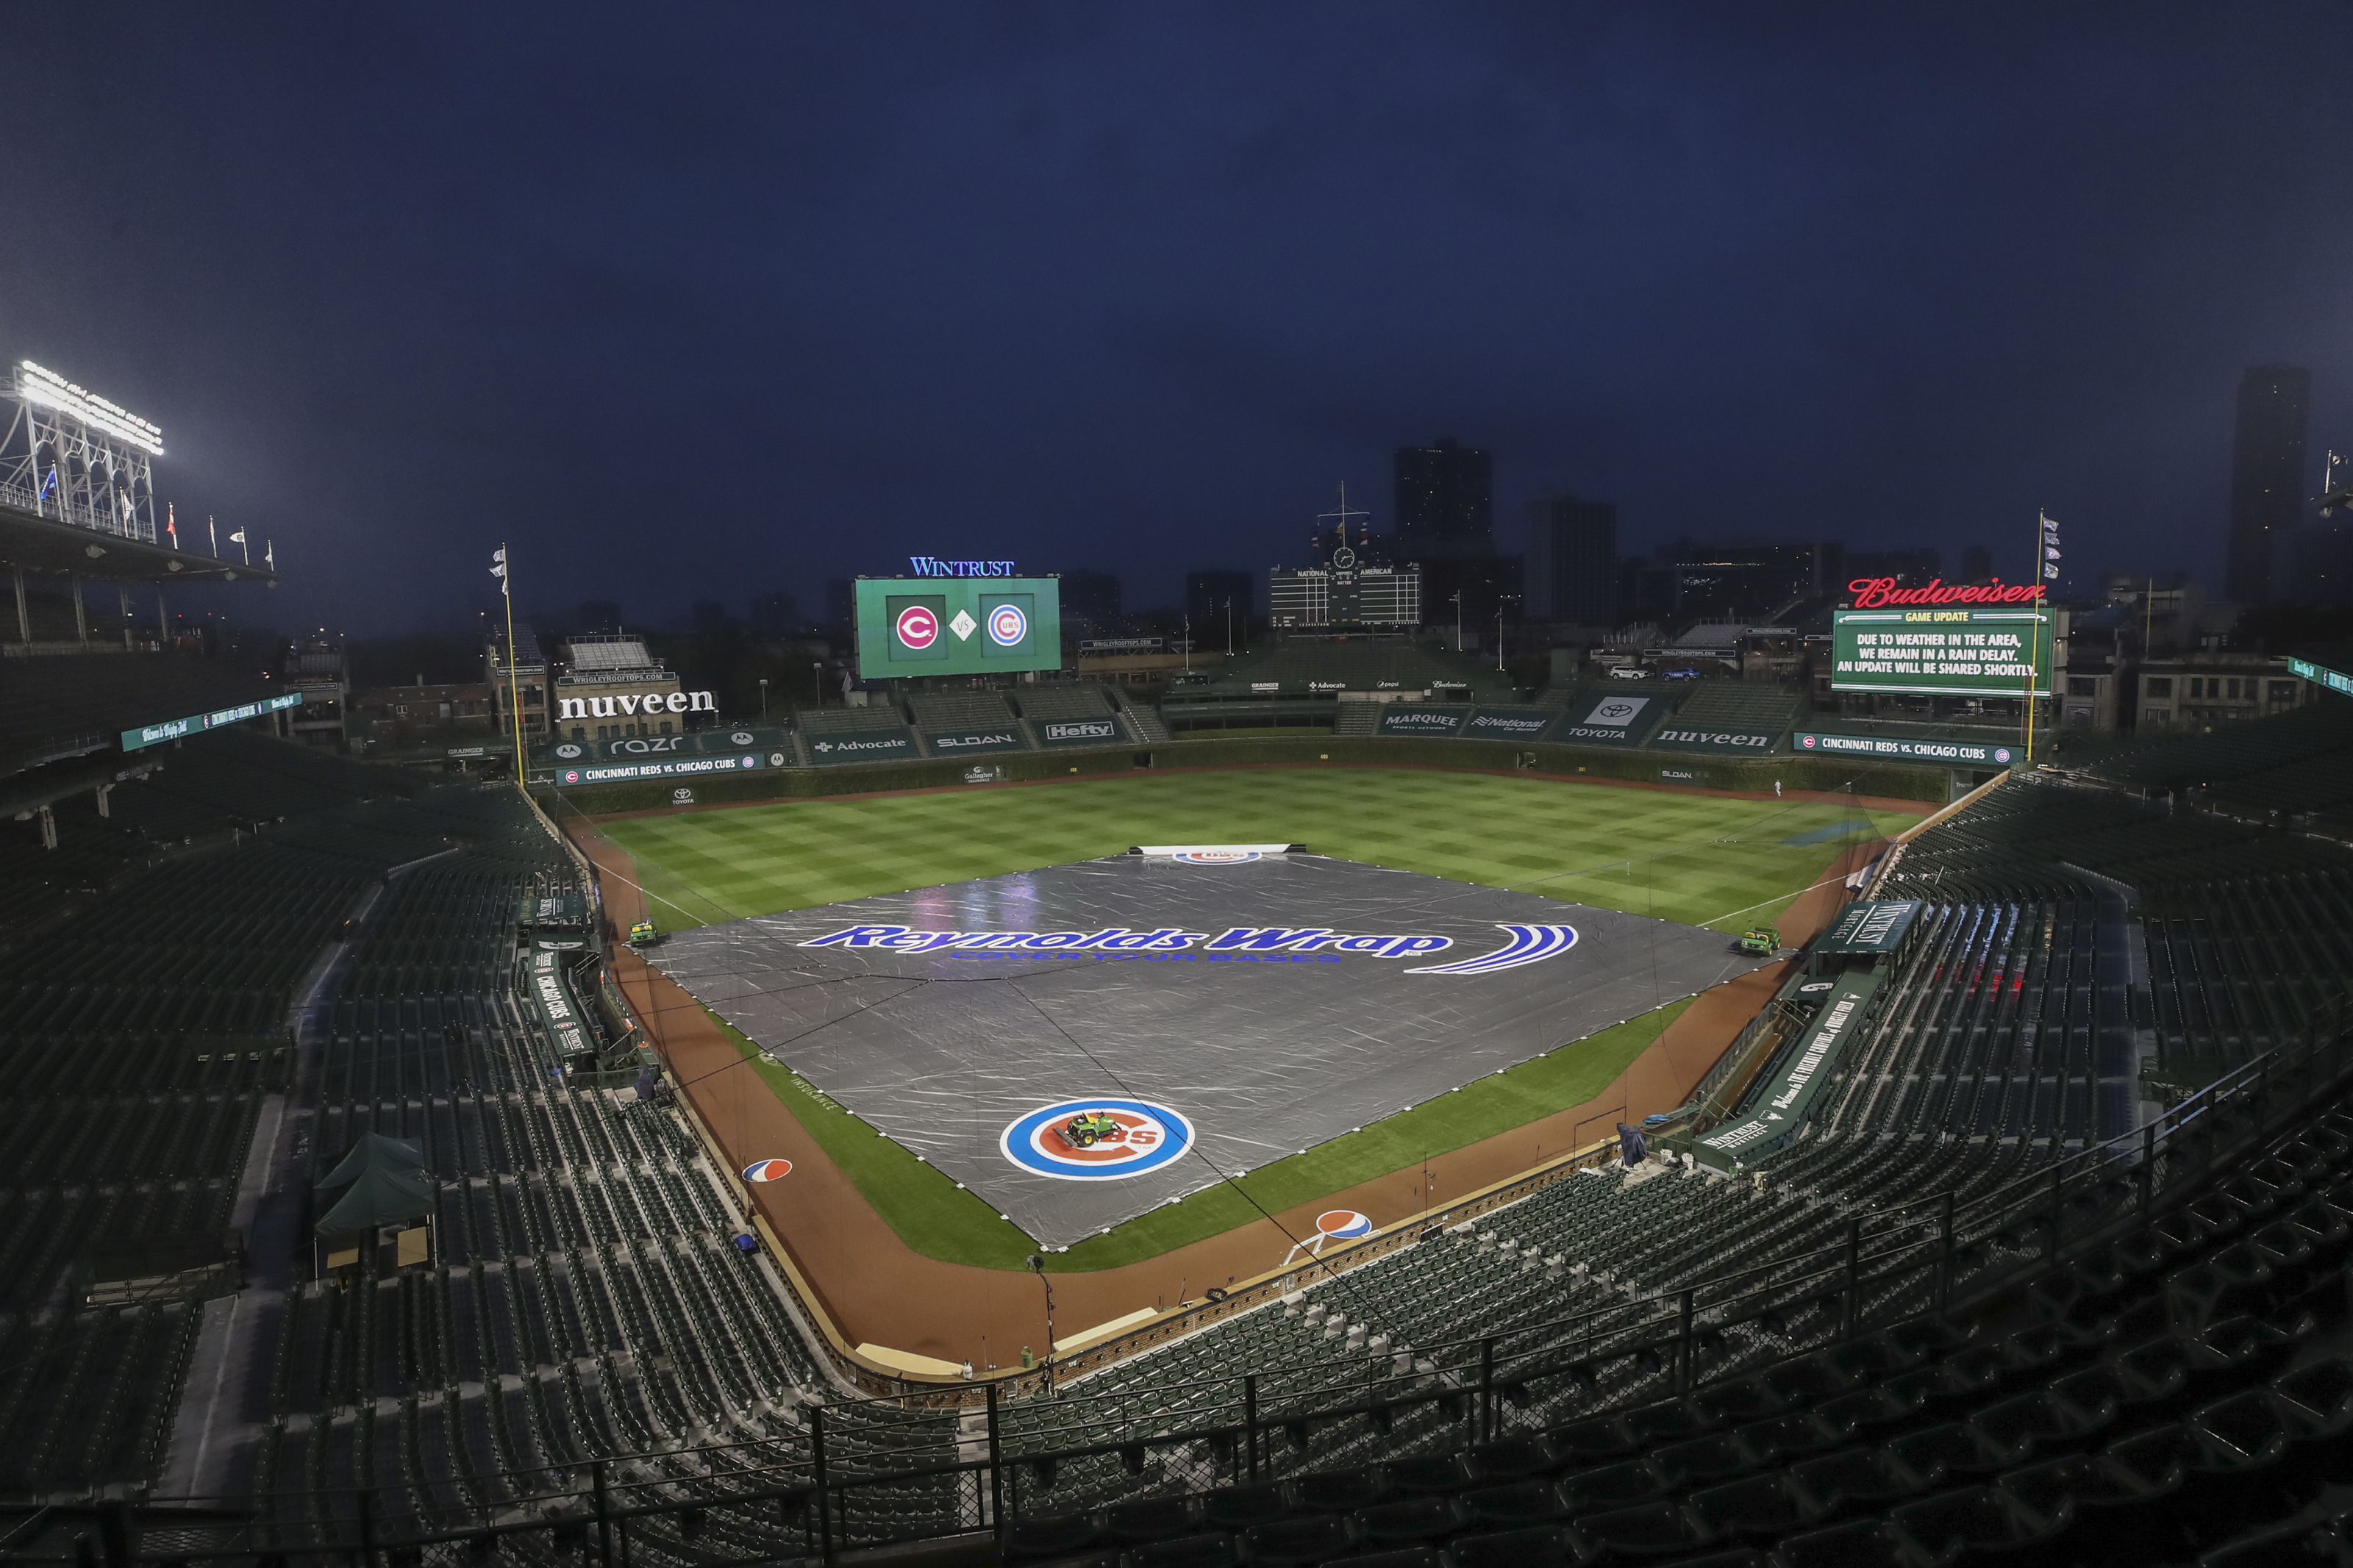 Wrigley Field should better honor the Chicago Bears history it holds